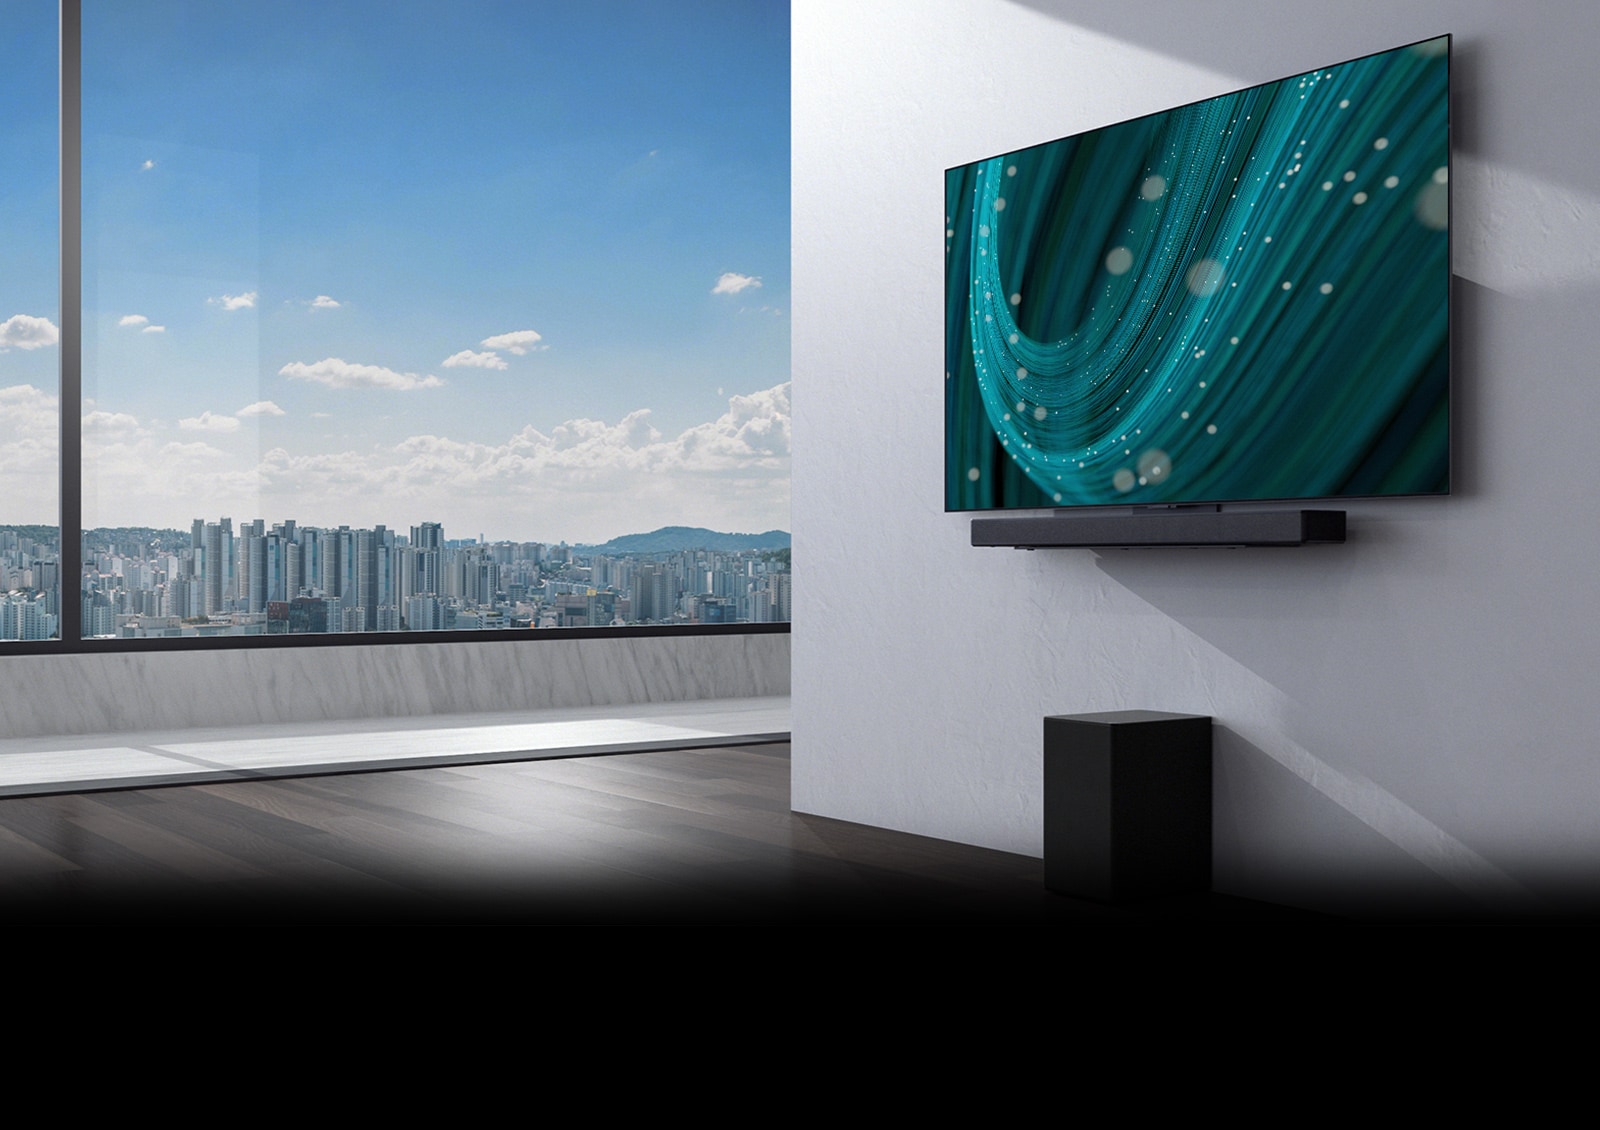 In the center of a space with a large window, there is a wall with a TV and soundbar mounted on it, and a subwoofer underneath. The screen displays a teal-colored background image.